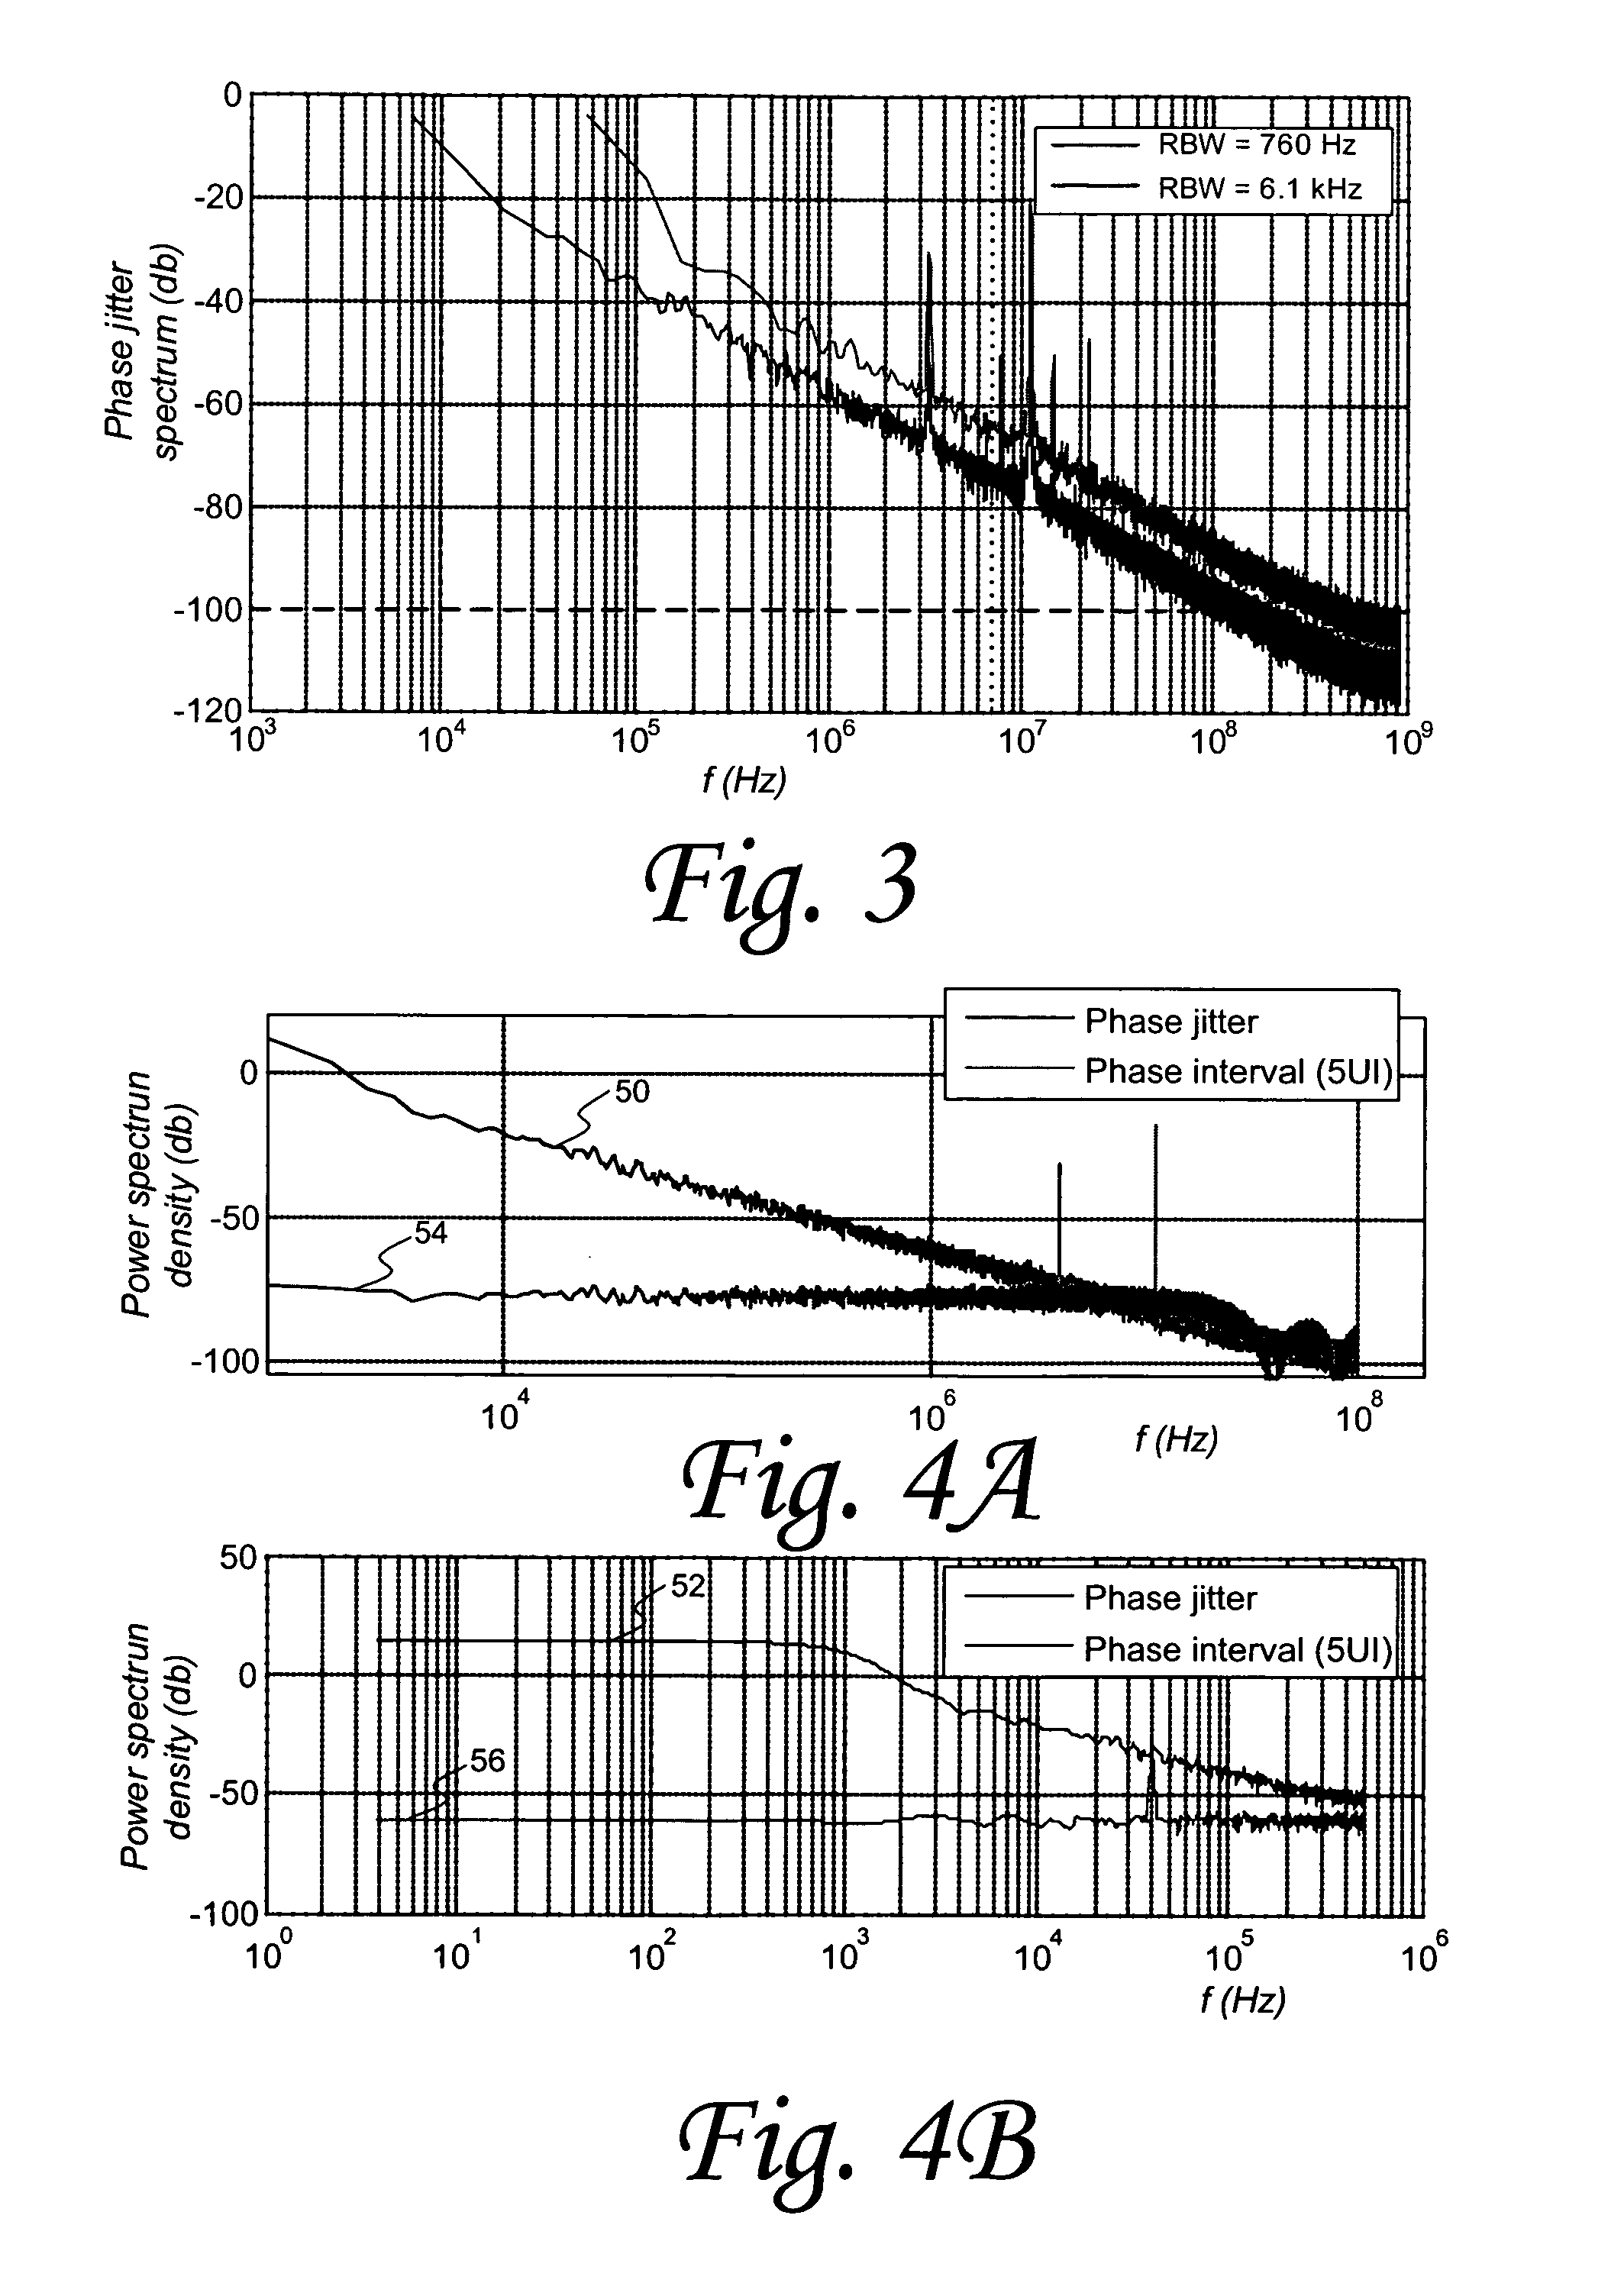 System and method of estimating phase noise based on measurement of phase jitter at multiple sampling frequencies